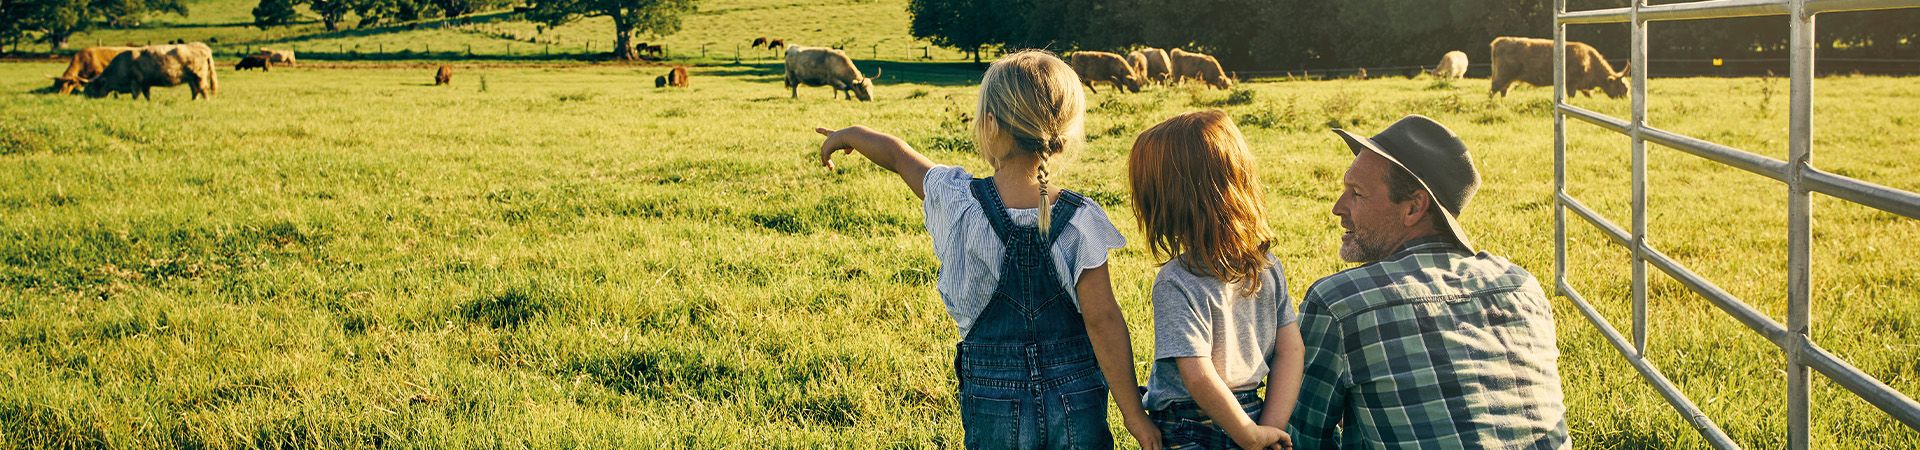 Eco-friendly holidays with children: a father and his children on a farm looking at the cows in a field.